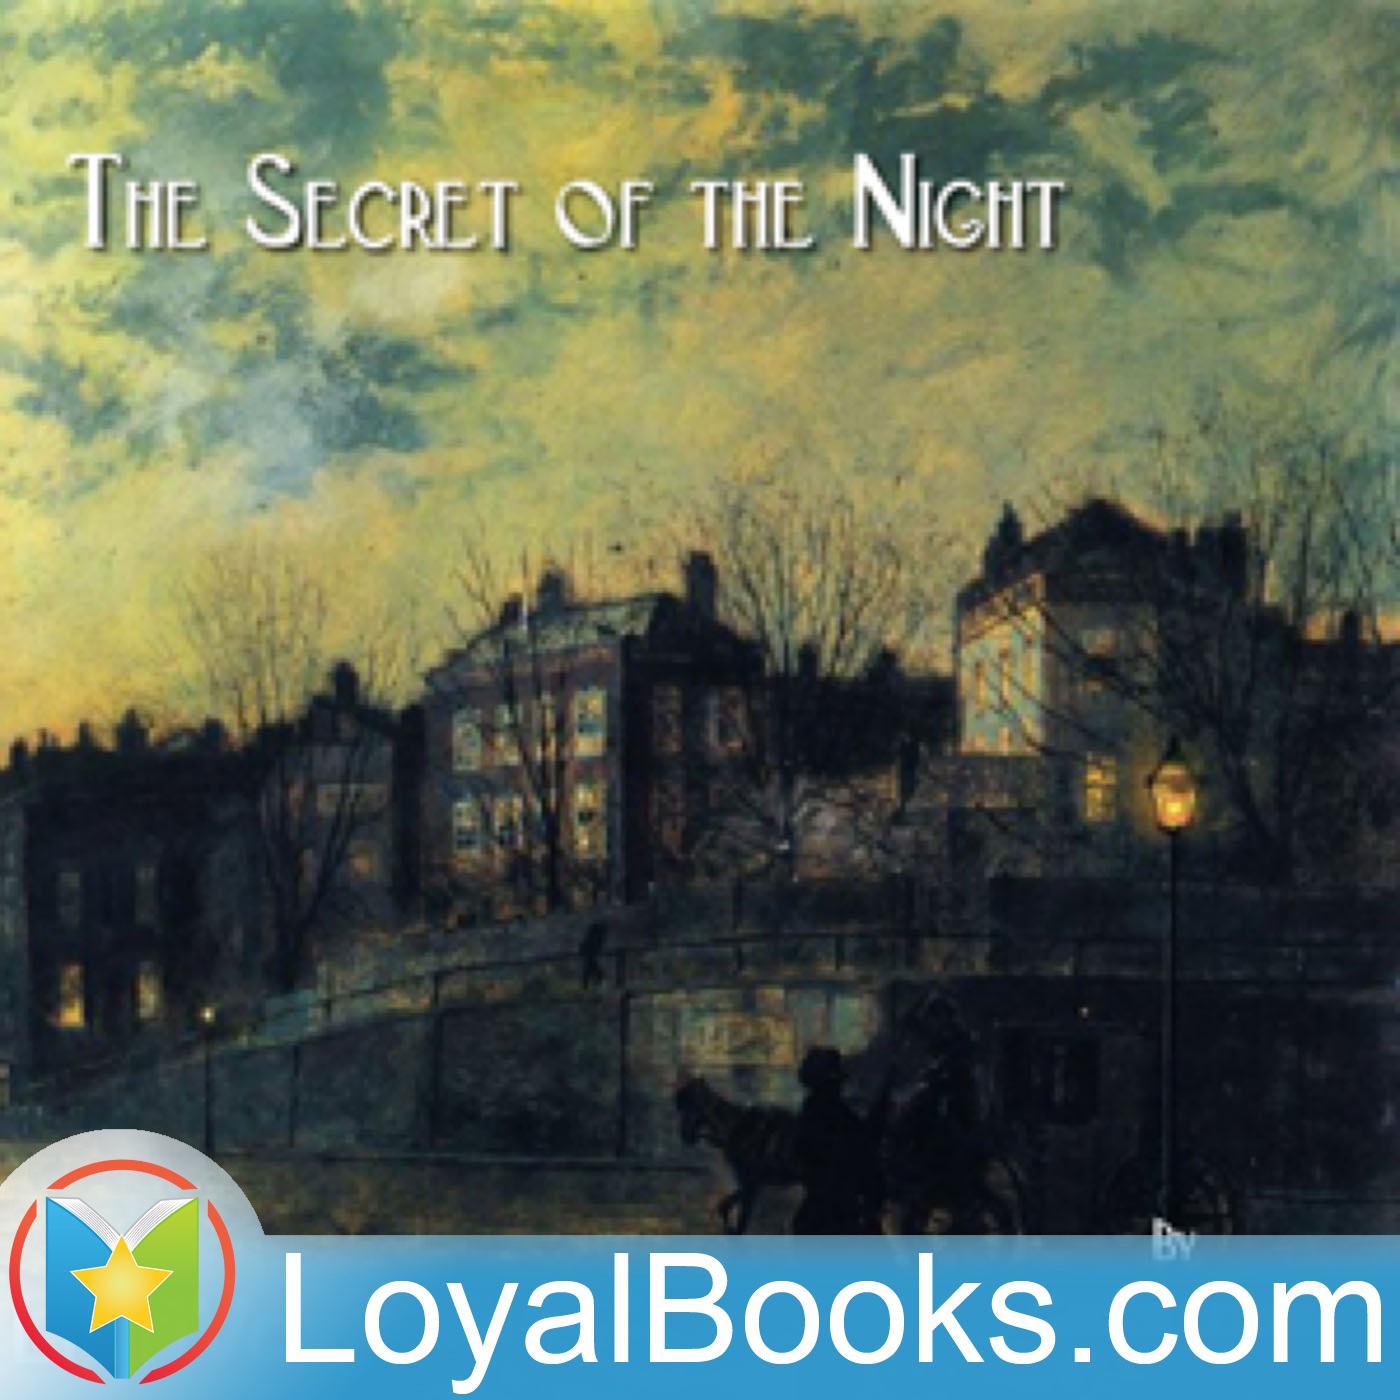 The Secret of the Night by Gaston Leroux